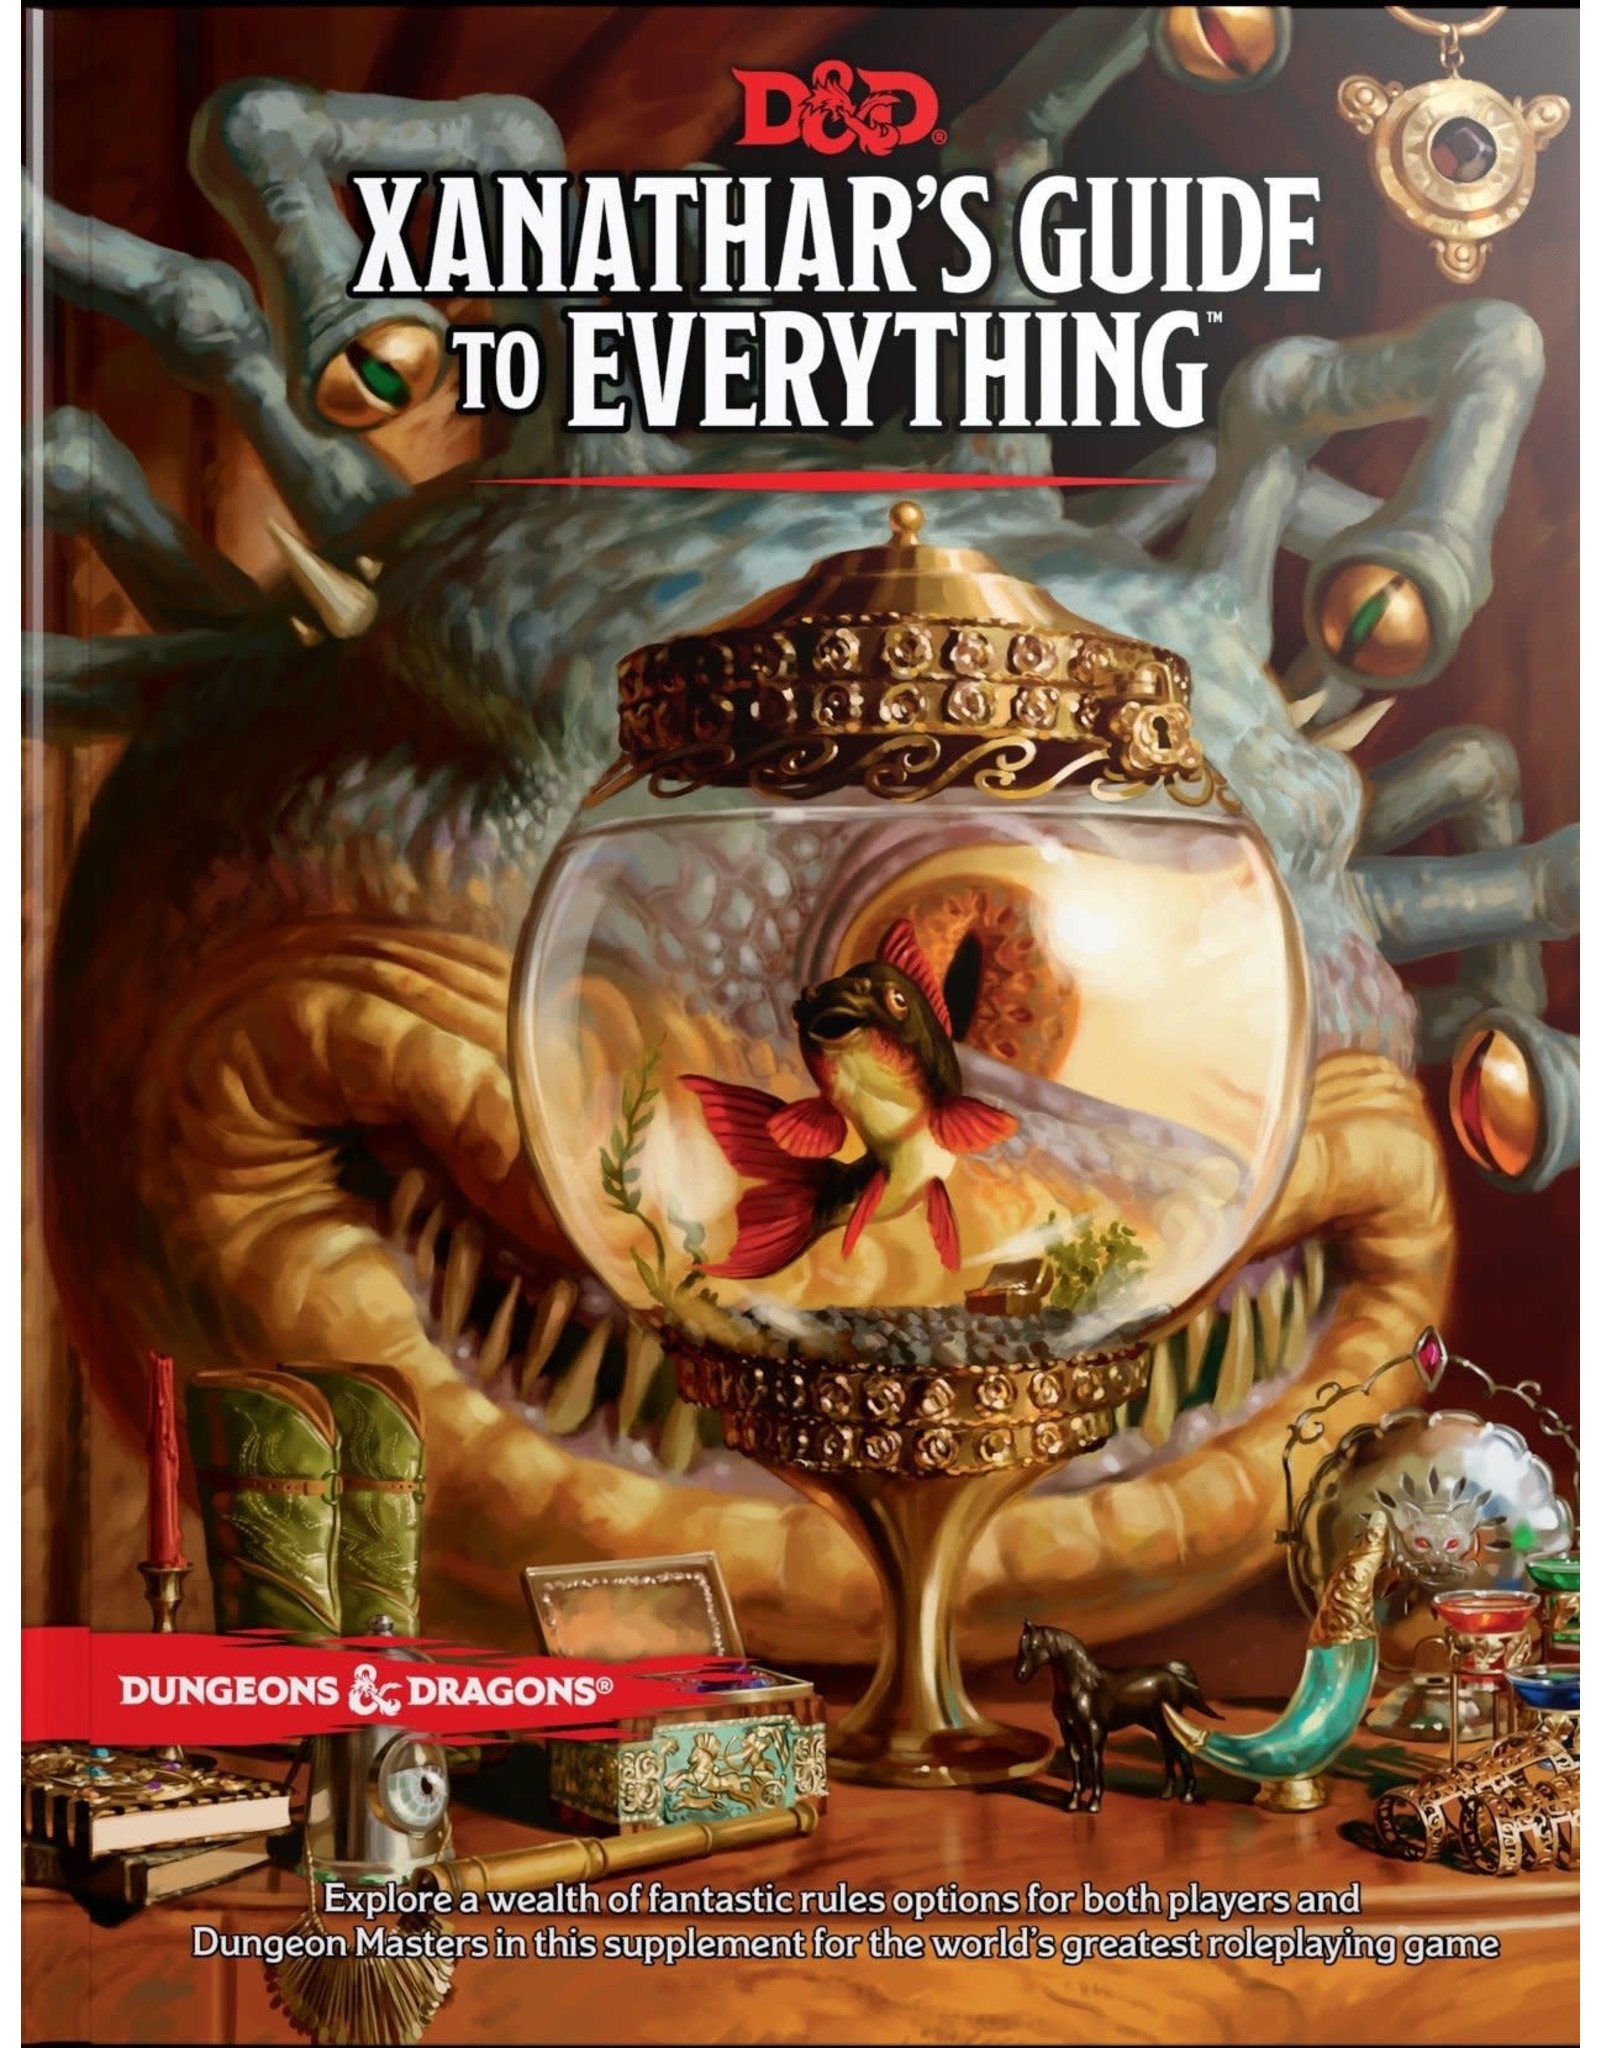 Dungeons & Dragons D&D - Xanathar's guide to everything